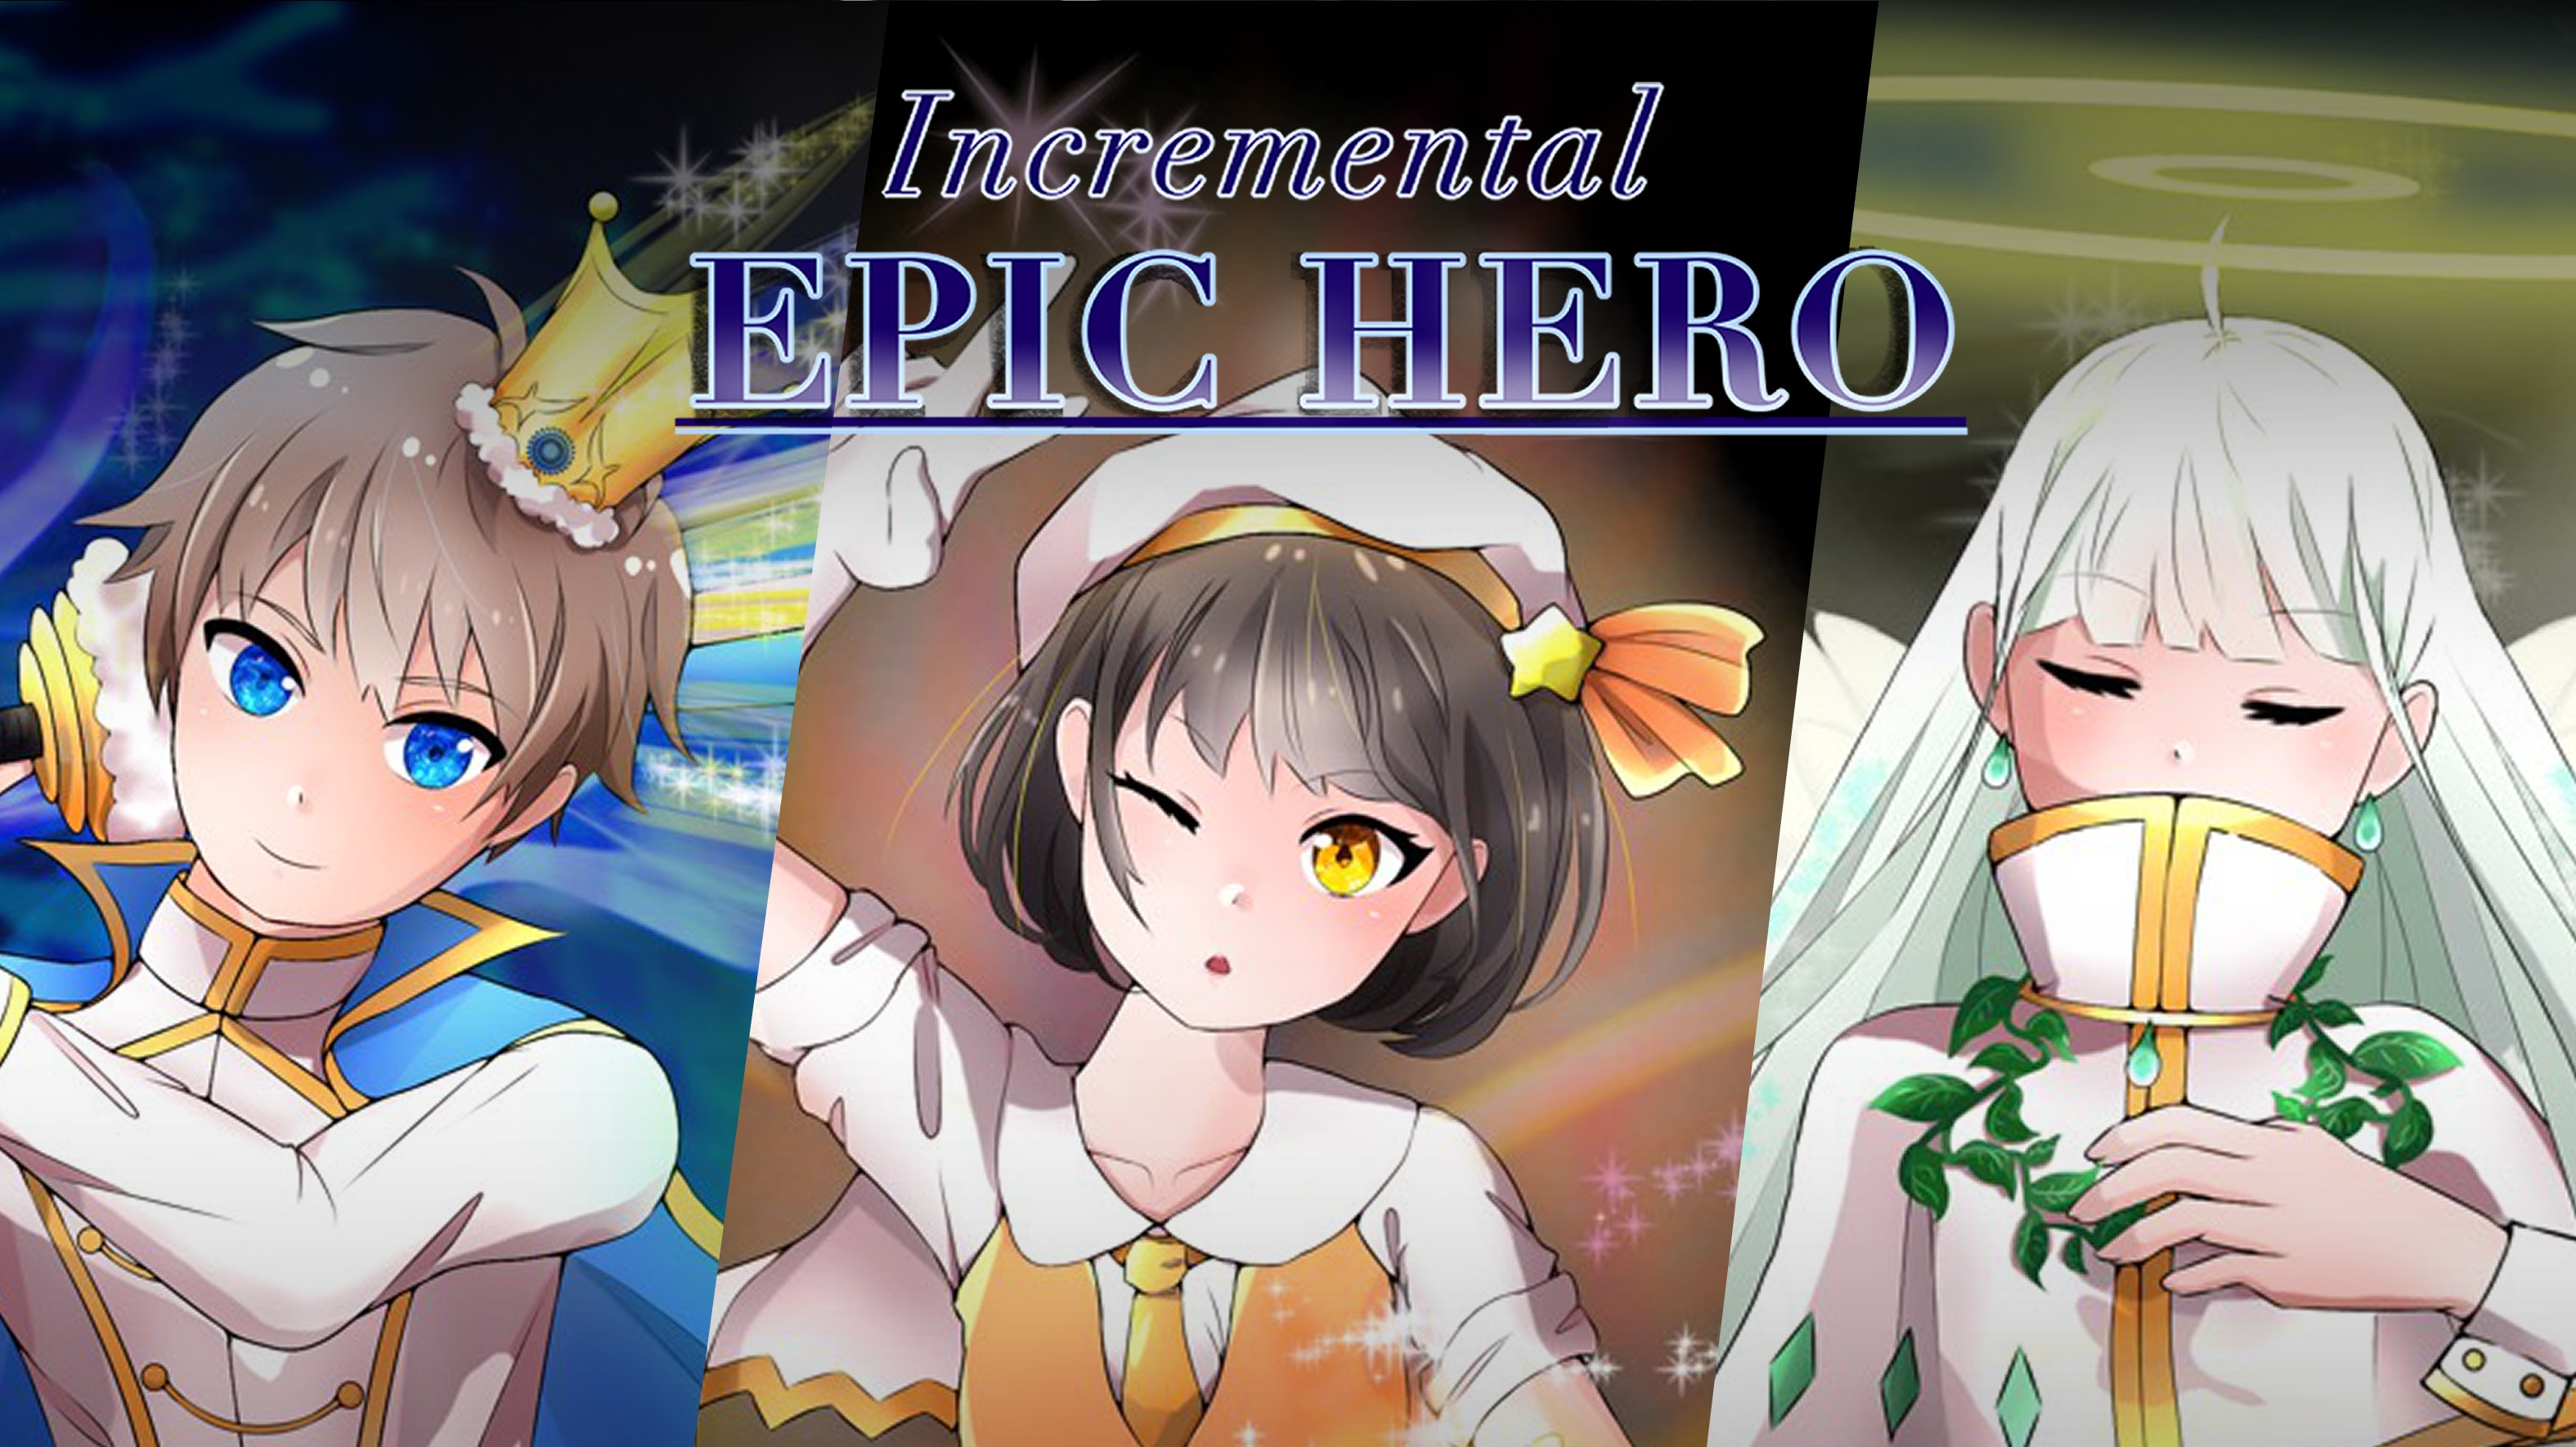 Incremental Epic Breakers - OFFICIAL LAUNCH! Incremental Idle